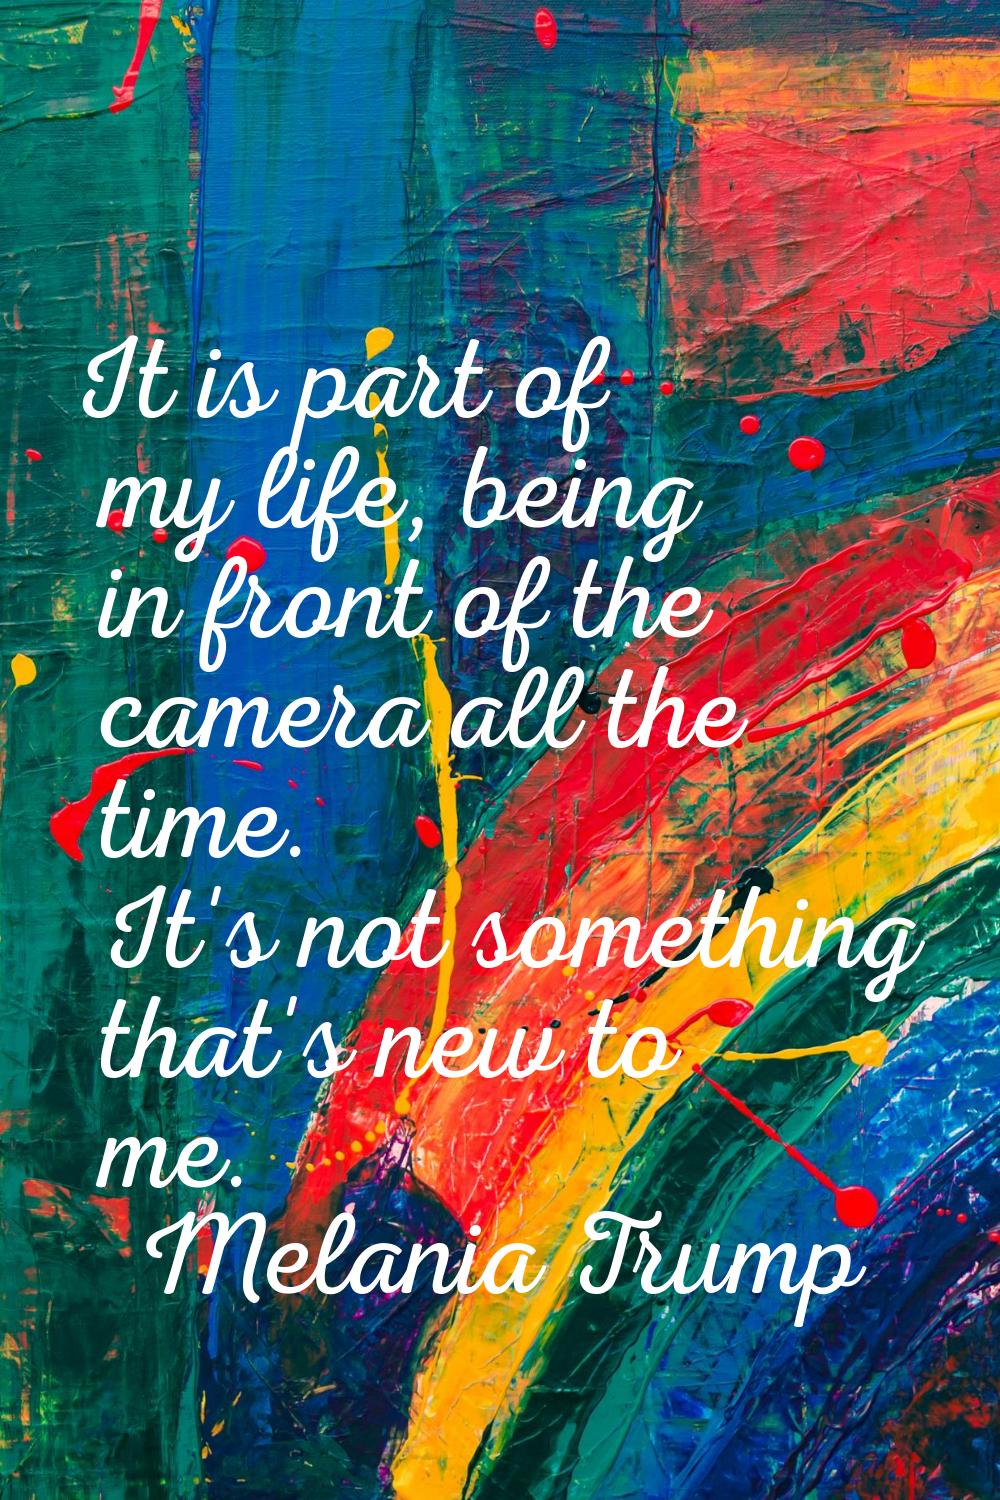 It is part of my life, being in front of the camera all the time. It's not something that's new to 